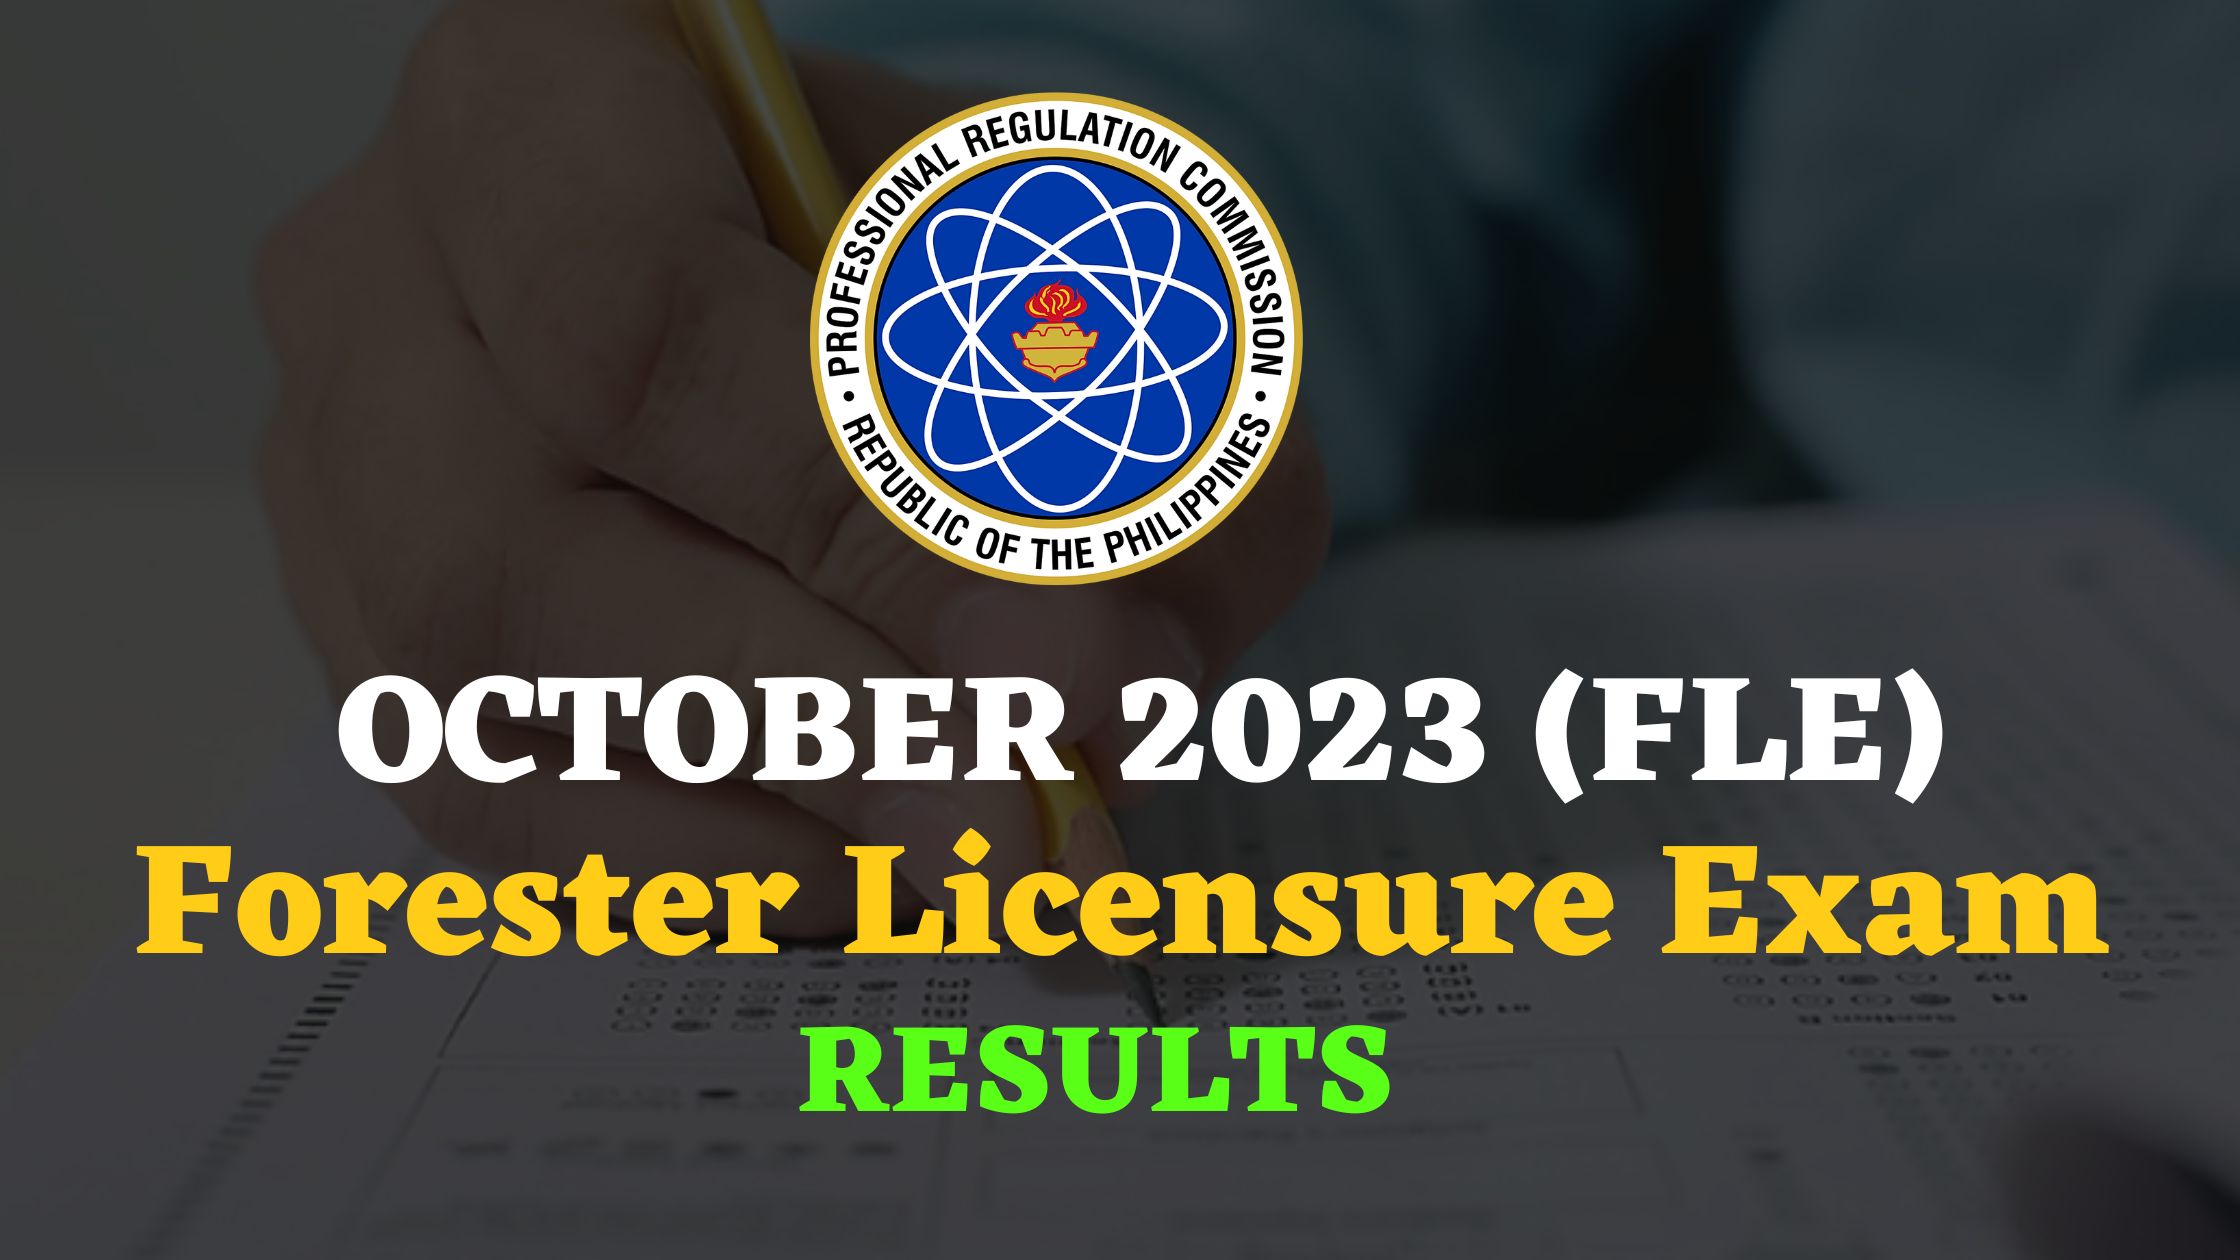 RESULTS October 2023 Forester Licensure Exam